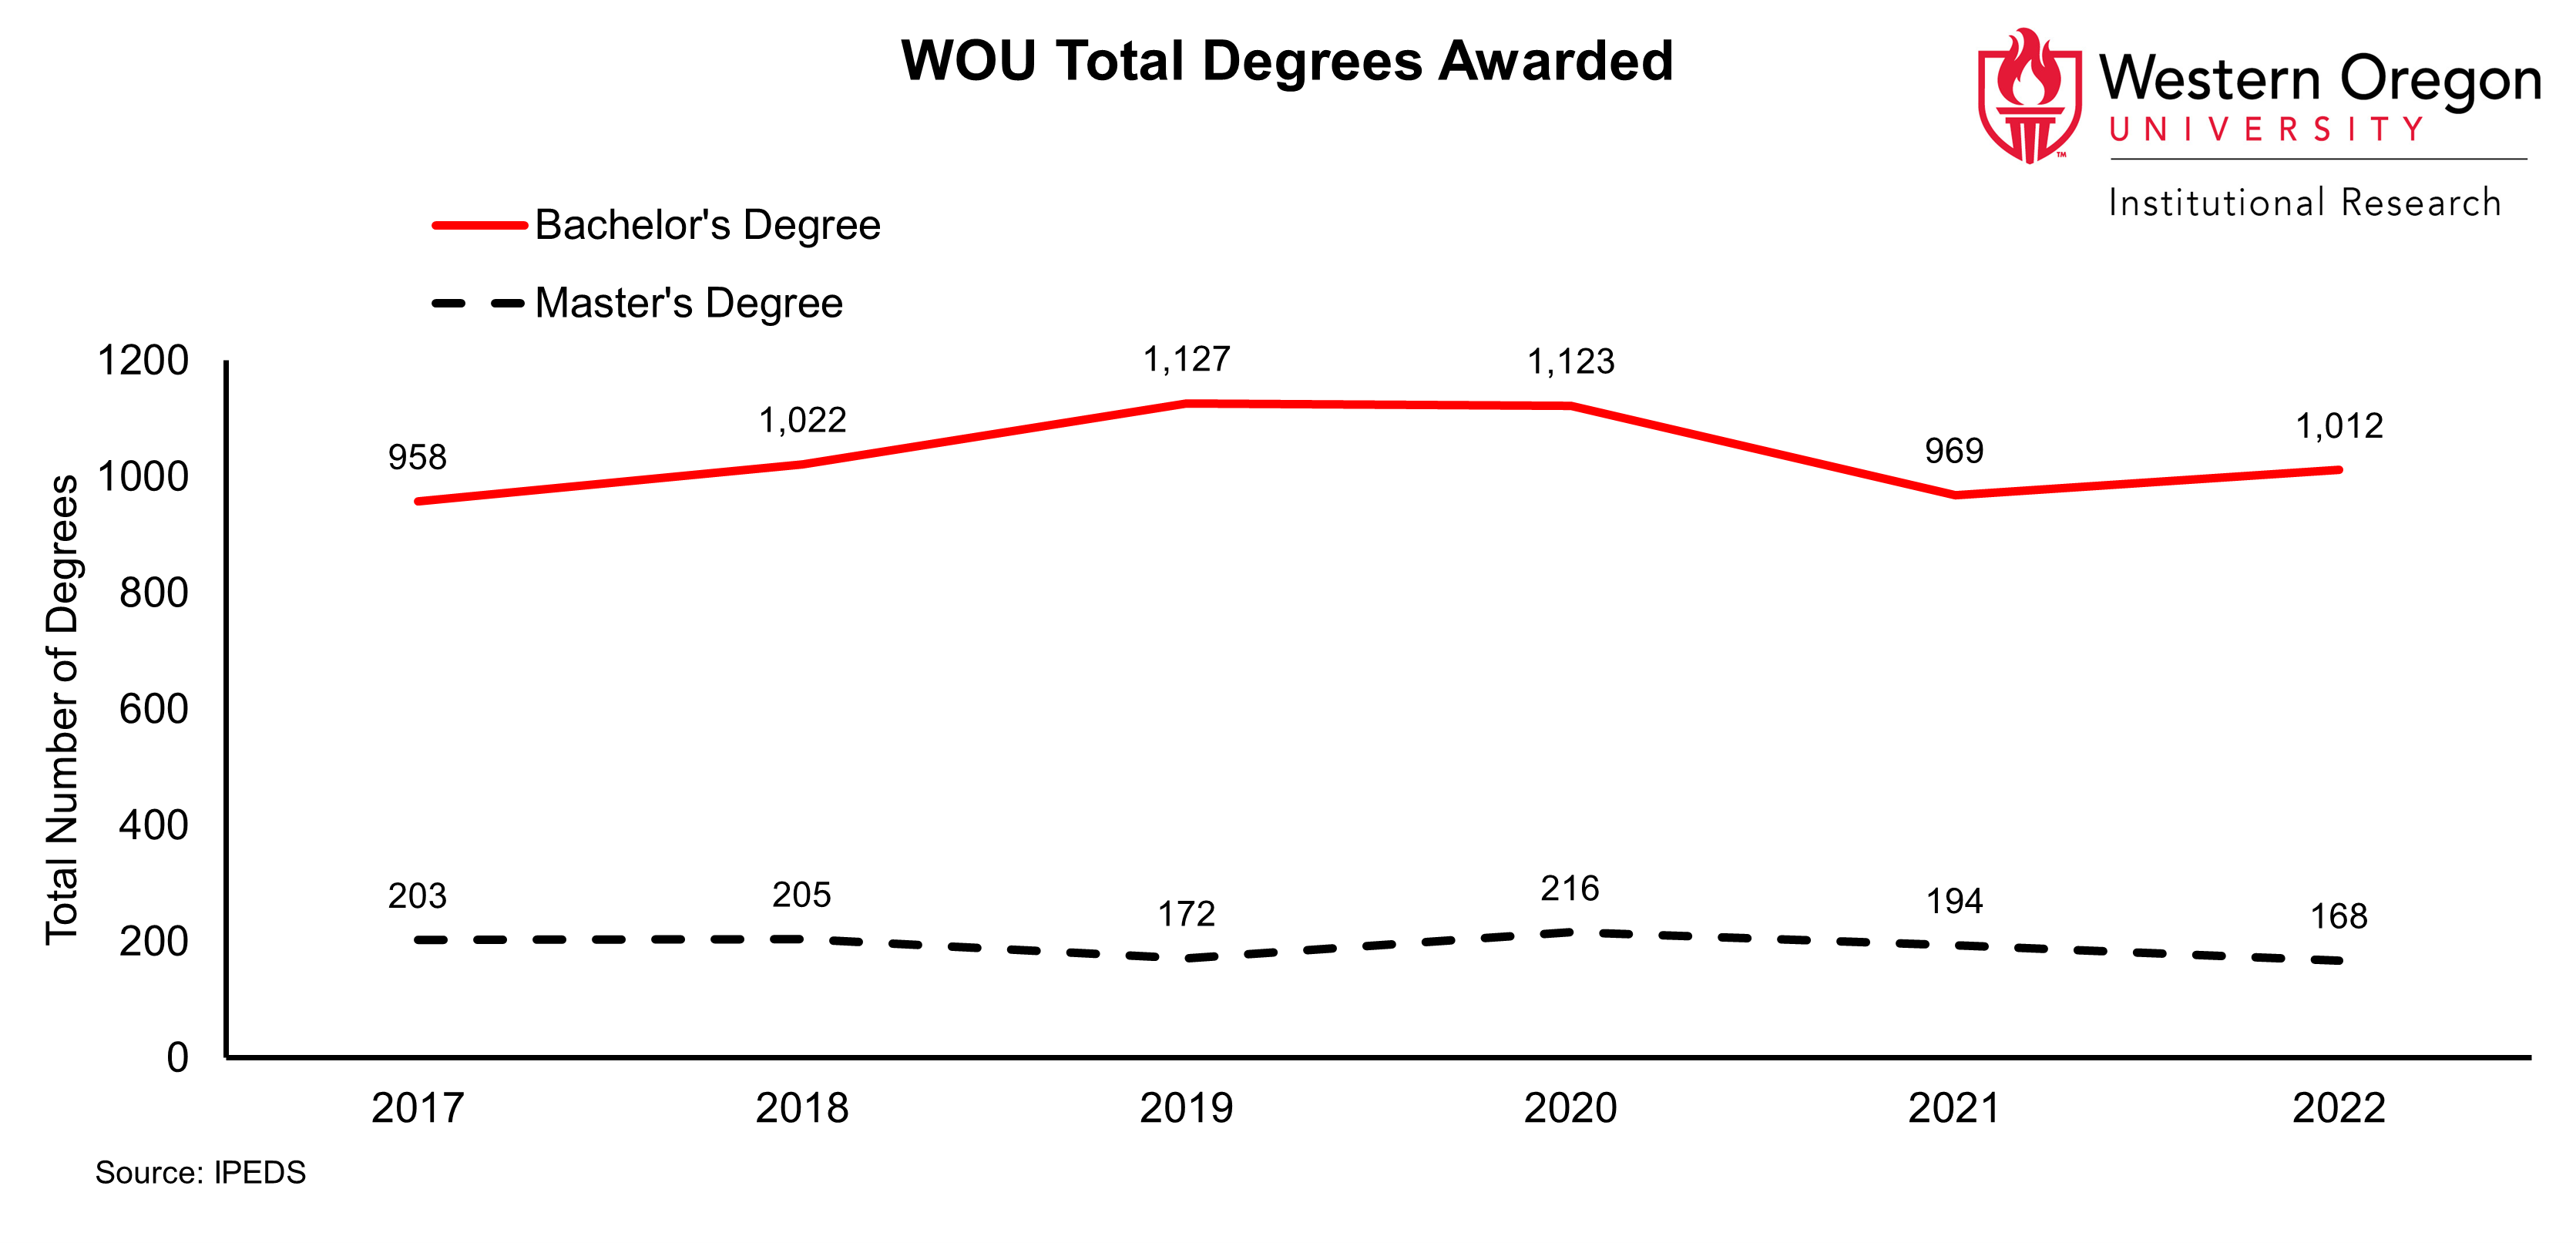 Line graph of the total number of Bachelor's and Master's degrees awarded at WOU between 2017 and 2020